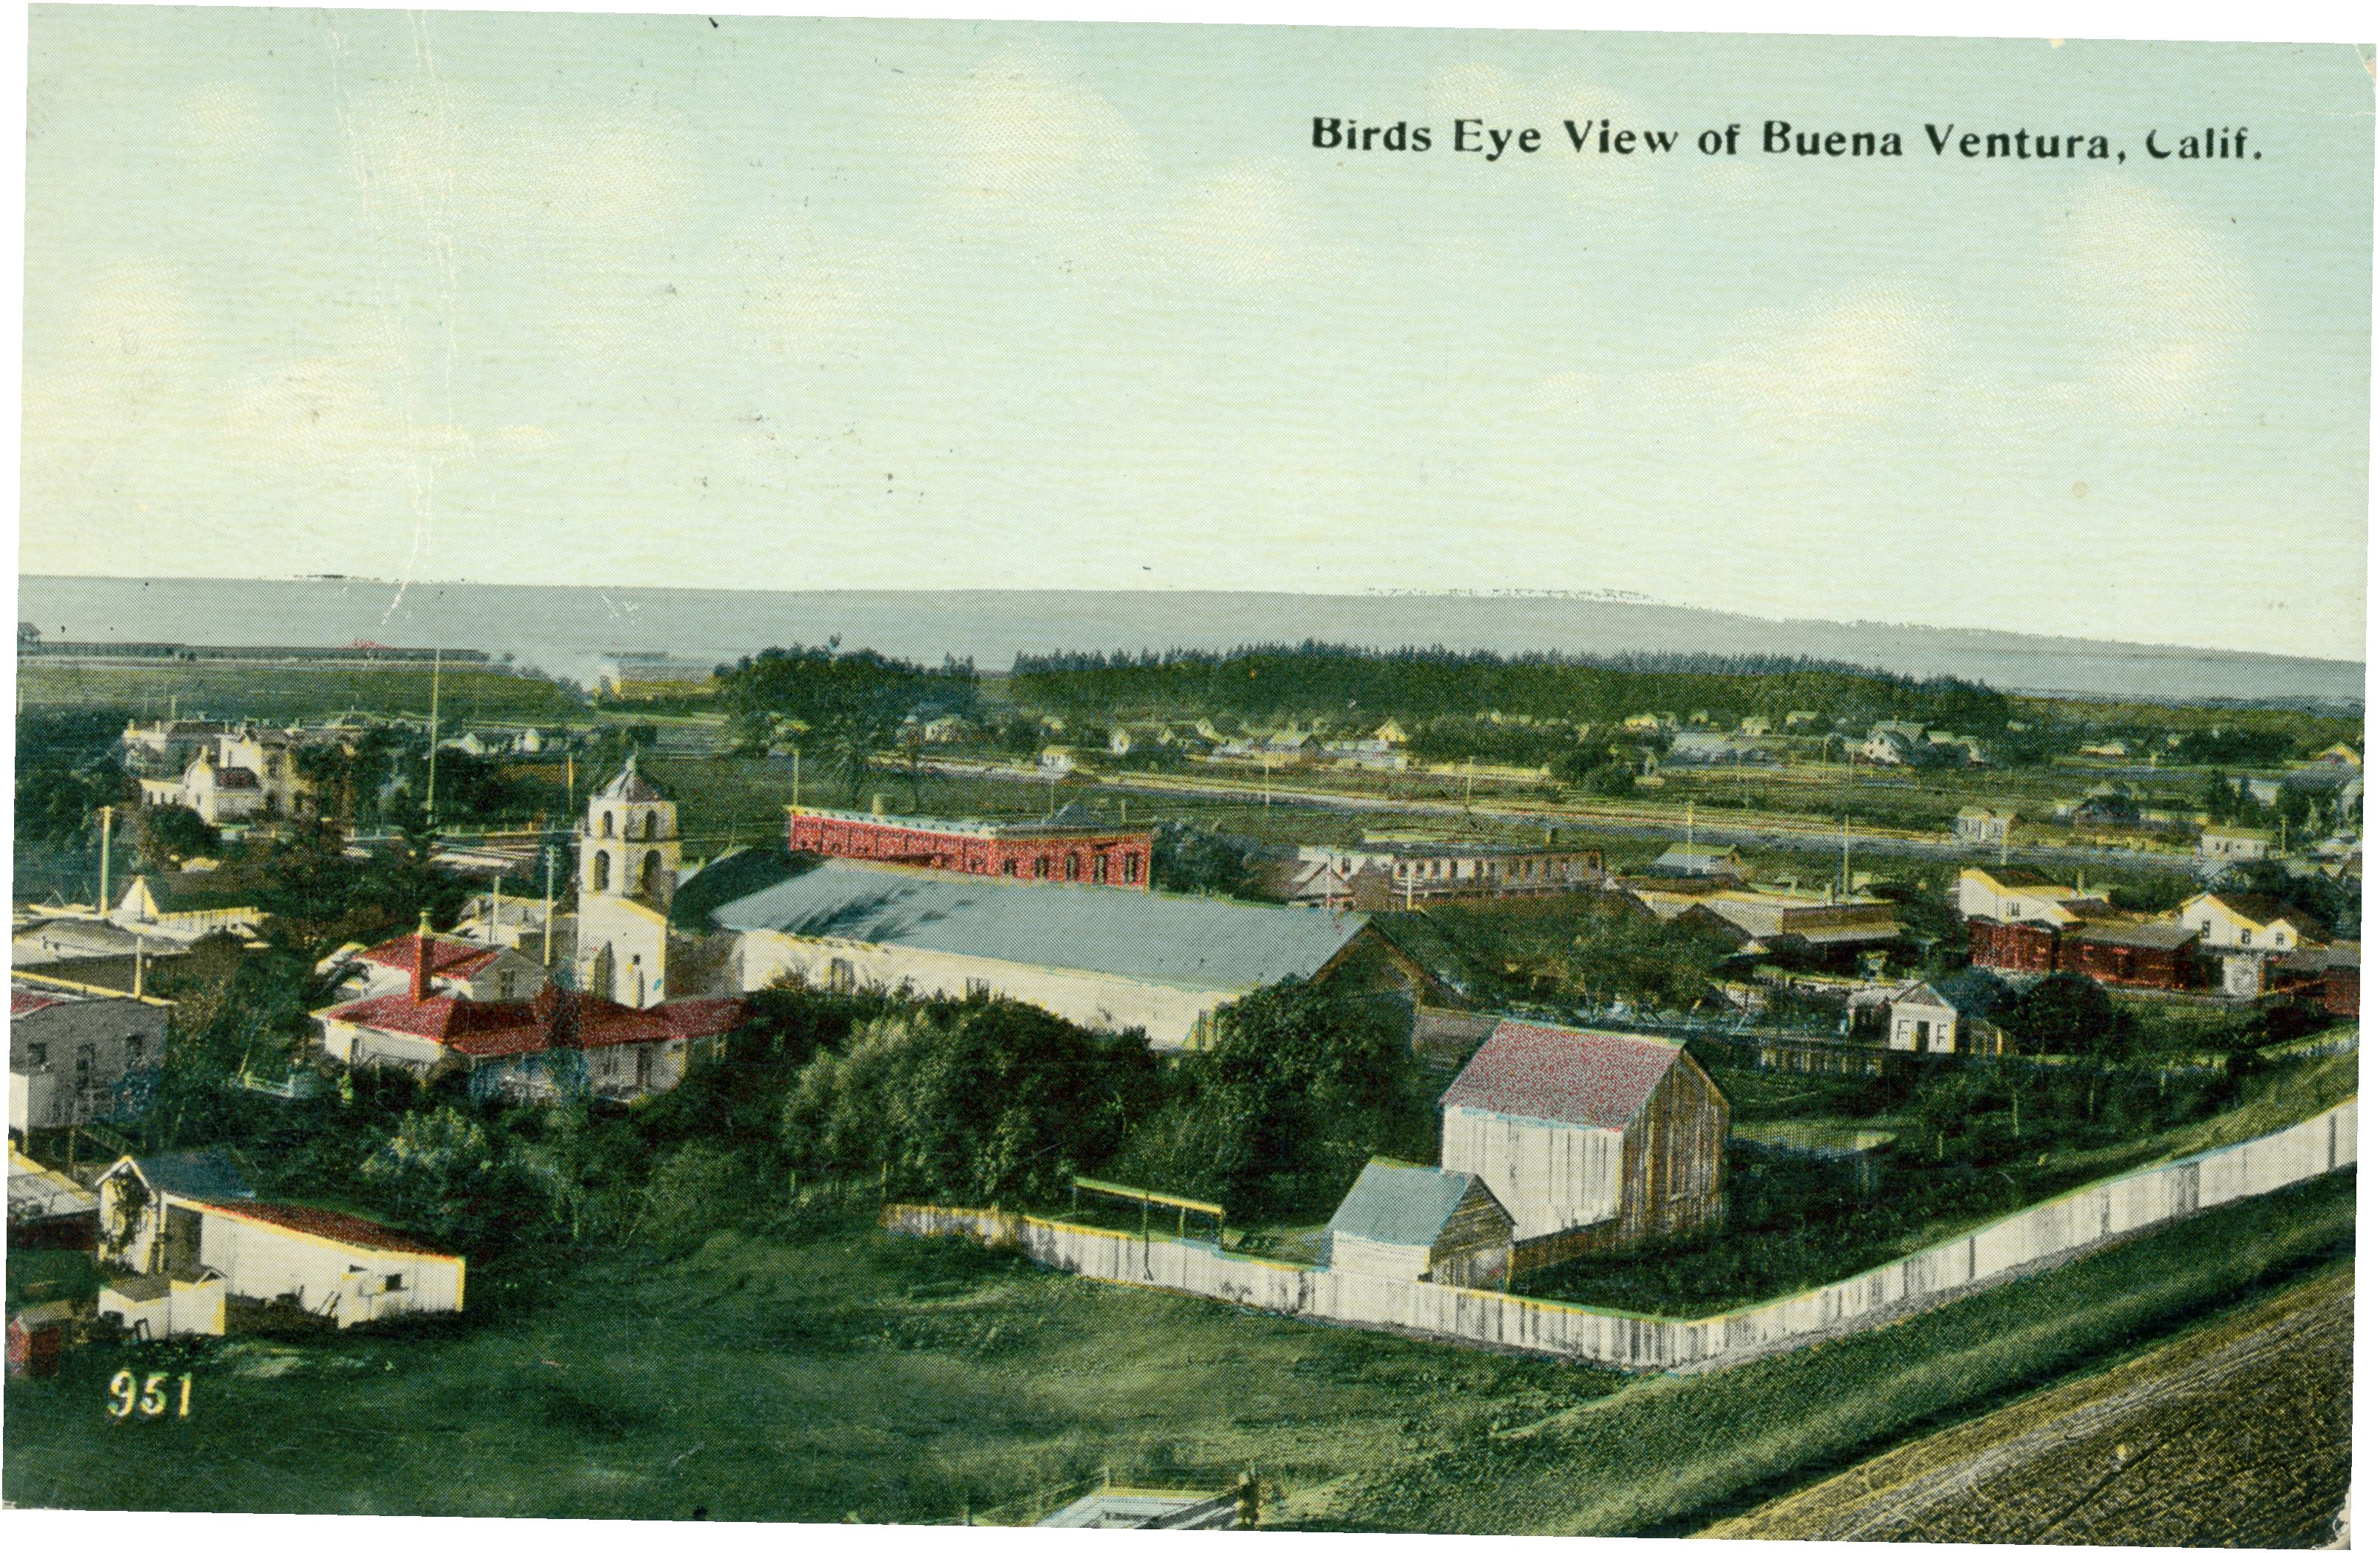 Shows a bird's eye view of the Buenaventura mission with the ocean in the background